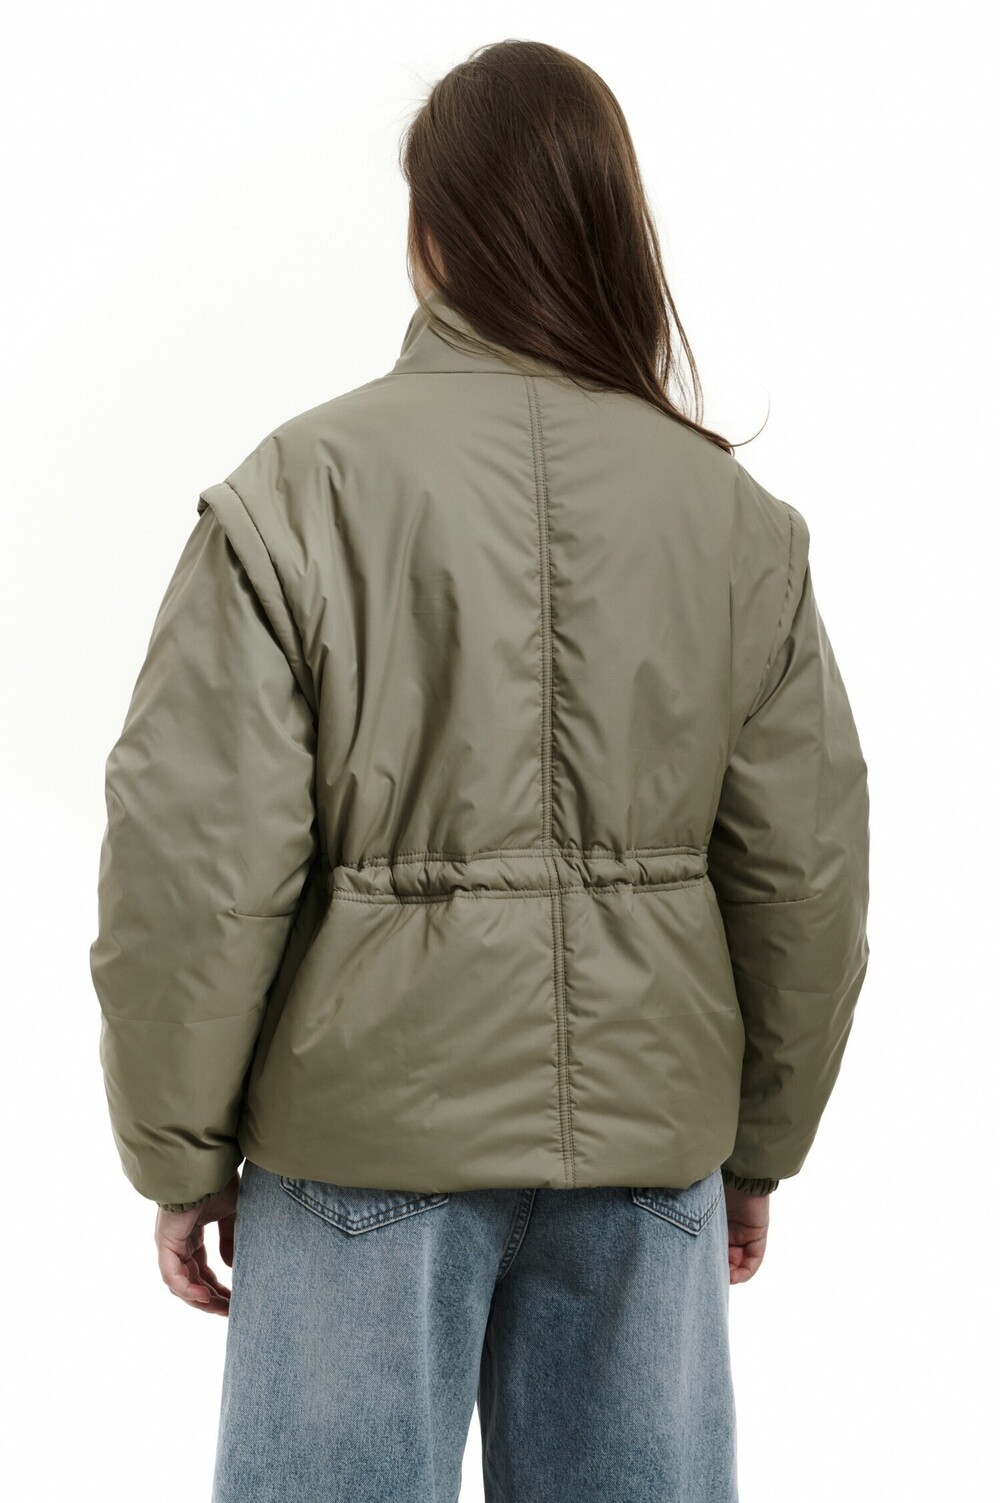 Muscovite jacket in olive color